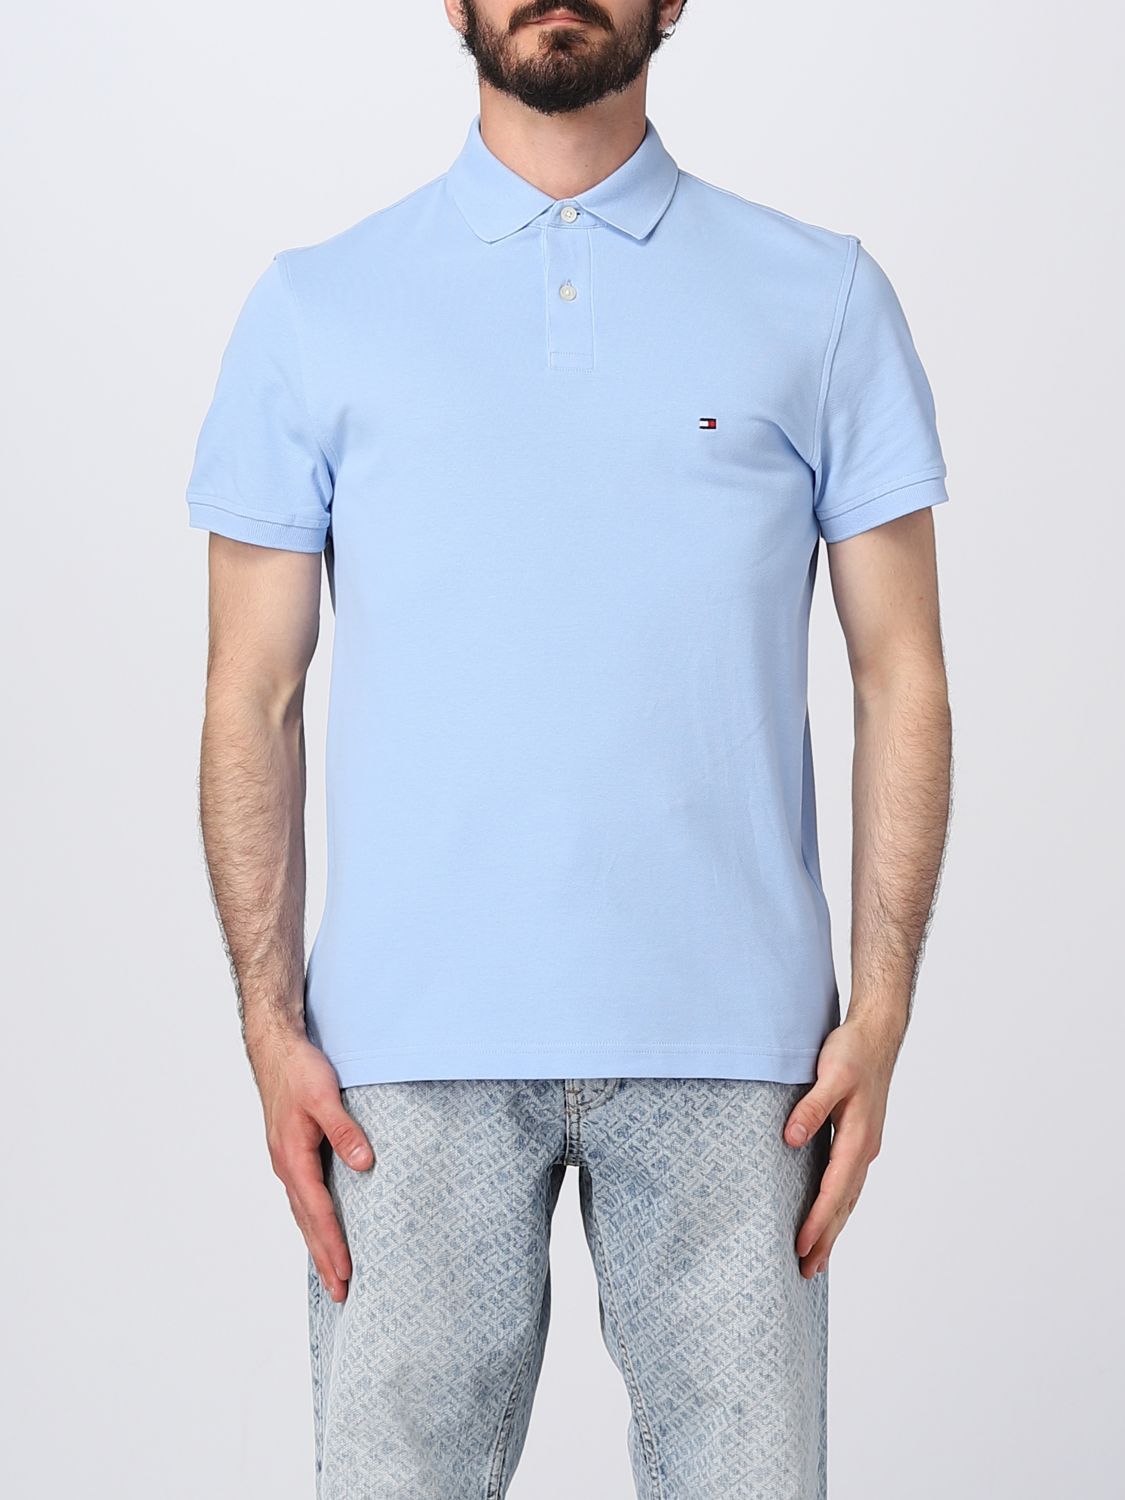 TOMMY HILFIGER: polo shirt for man - Gnawed Blue | Tommy Hilfiger polo shirt online at GIGLIO.COM